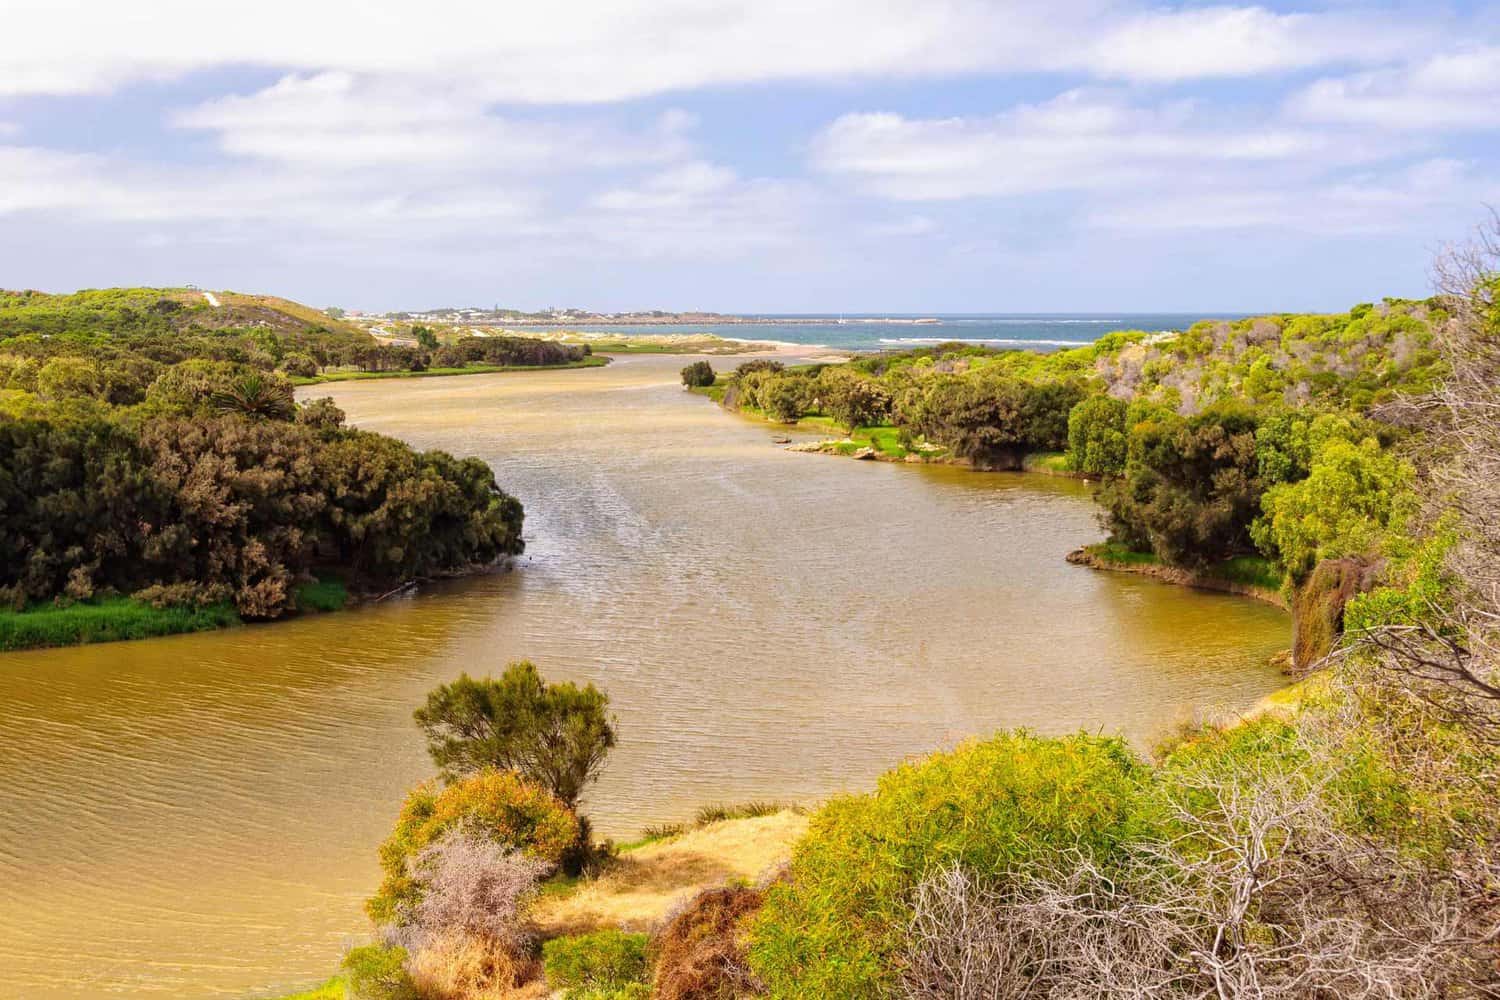 A winding river meanders through dense greenery, leading to the blue ocean in the distance, with a glimpse of the coastal city of Geraldton on the horizon.